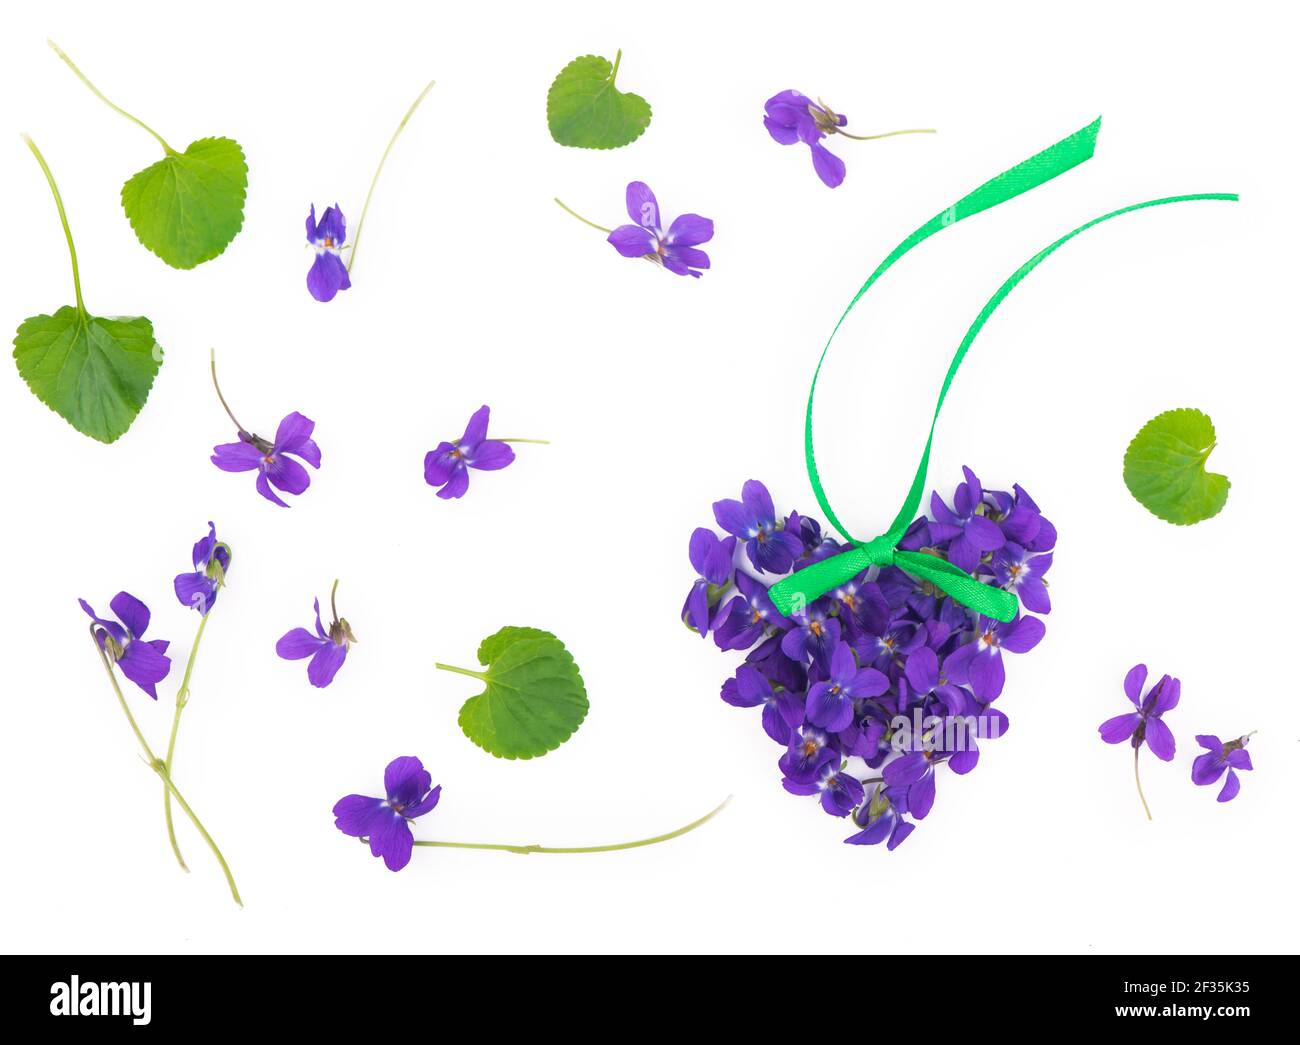 Green leaf and flowers of Wood violet Viola odorata isolated on white background. Medicinal and garden plant Stock Photo